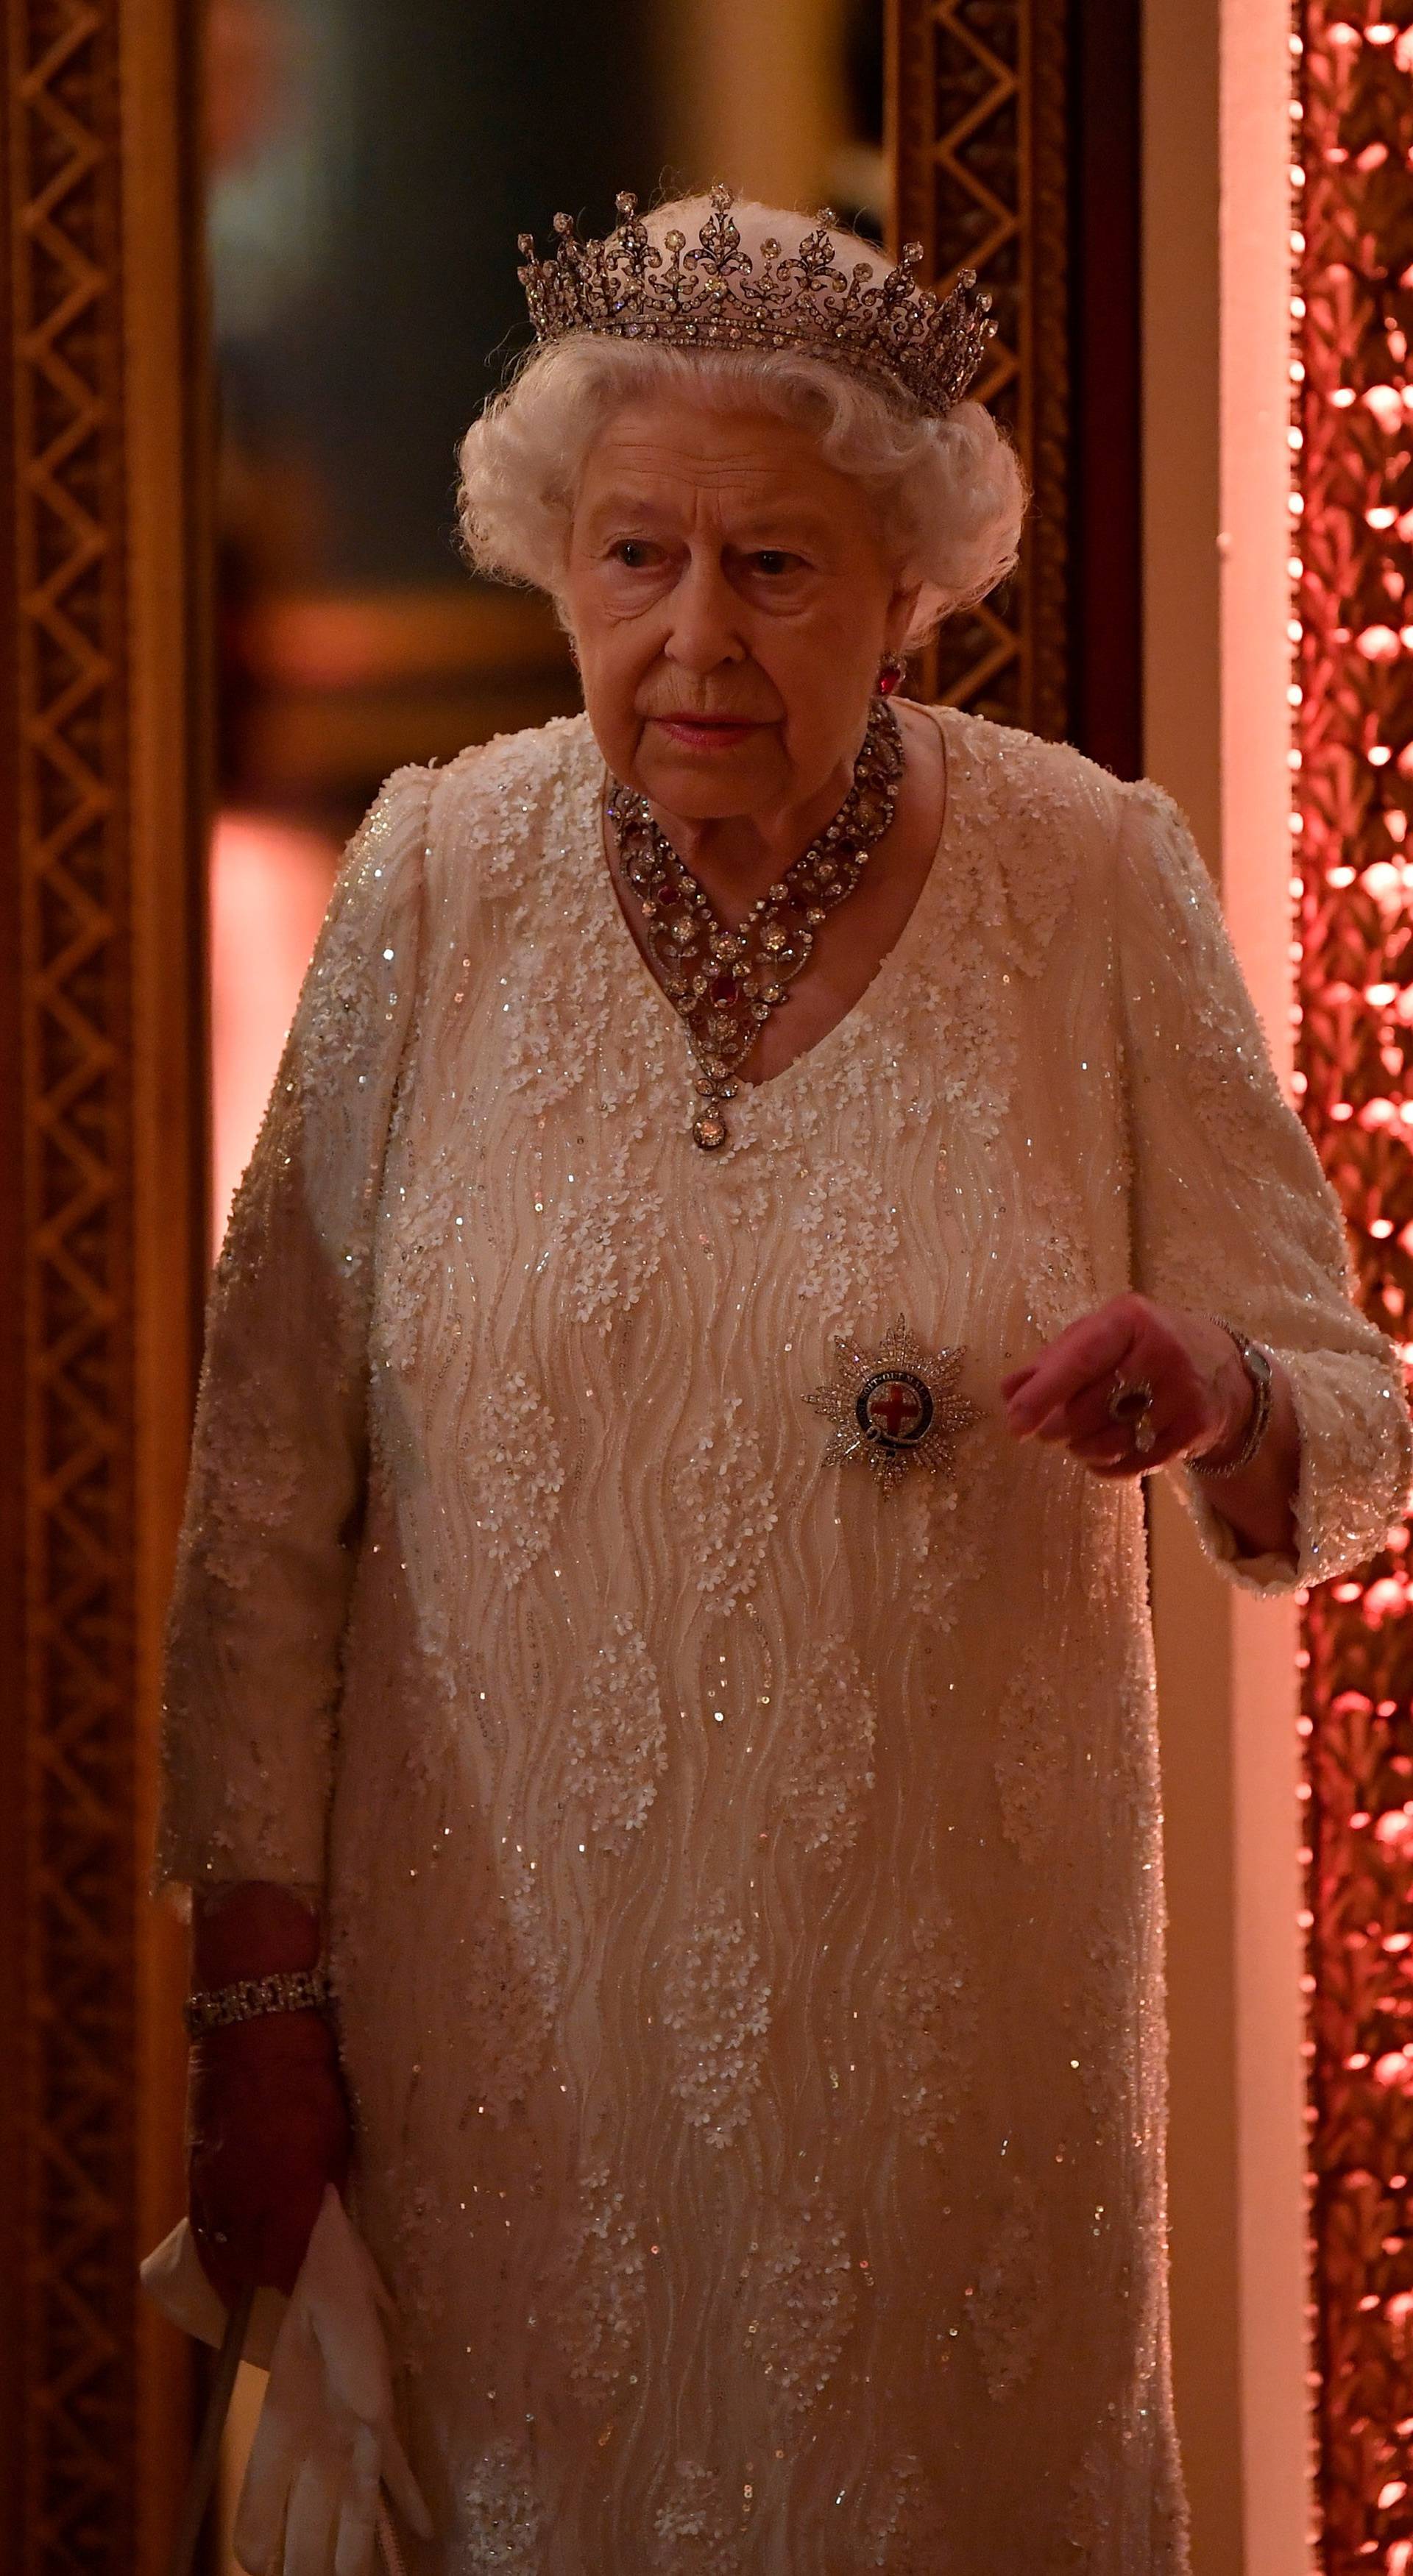 Britain's Queen Elizabeth arrives to The Queen's Dinner during the Commonwealth Heads of Government Meeting at Buckingham Palace in London, Britain